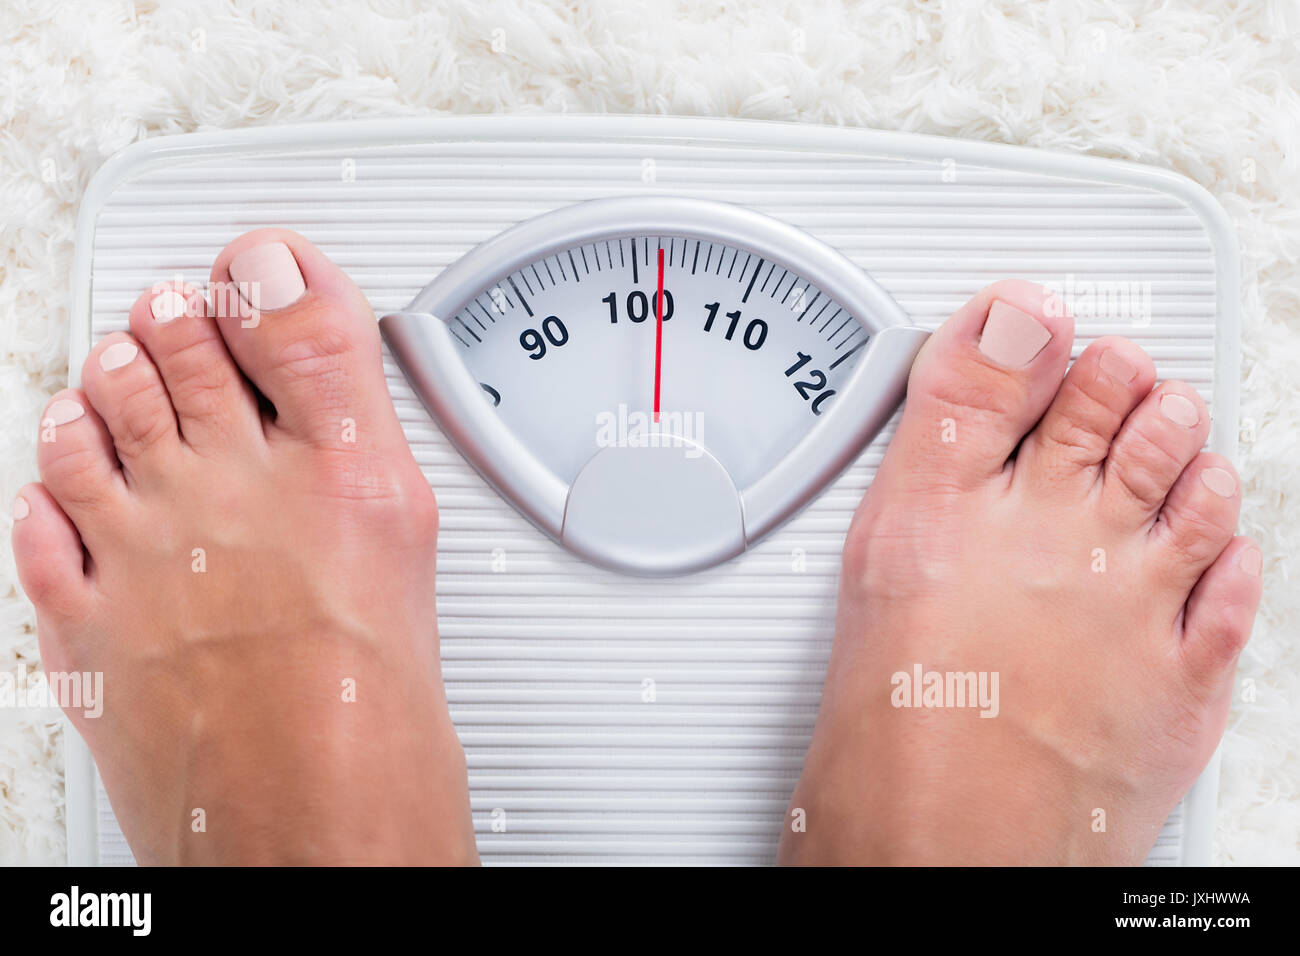 https://c8.alamy.com/comp/JXHWWA/low-section-of-overweight-obese-person-measuring-body-weight-on-weighing-JXHWWA.jpg